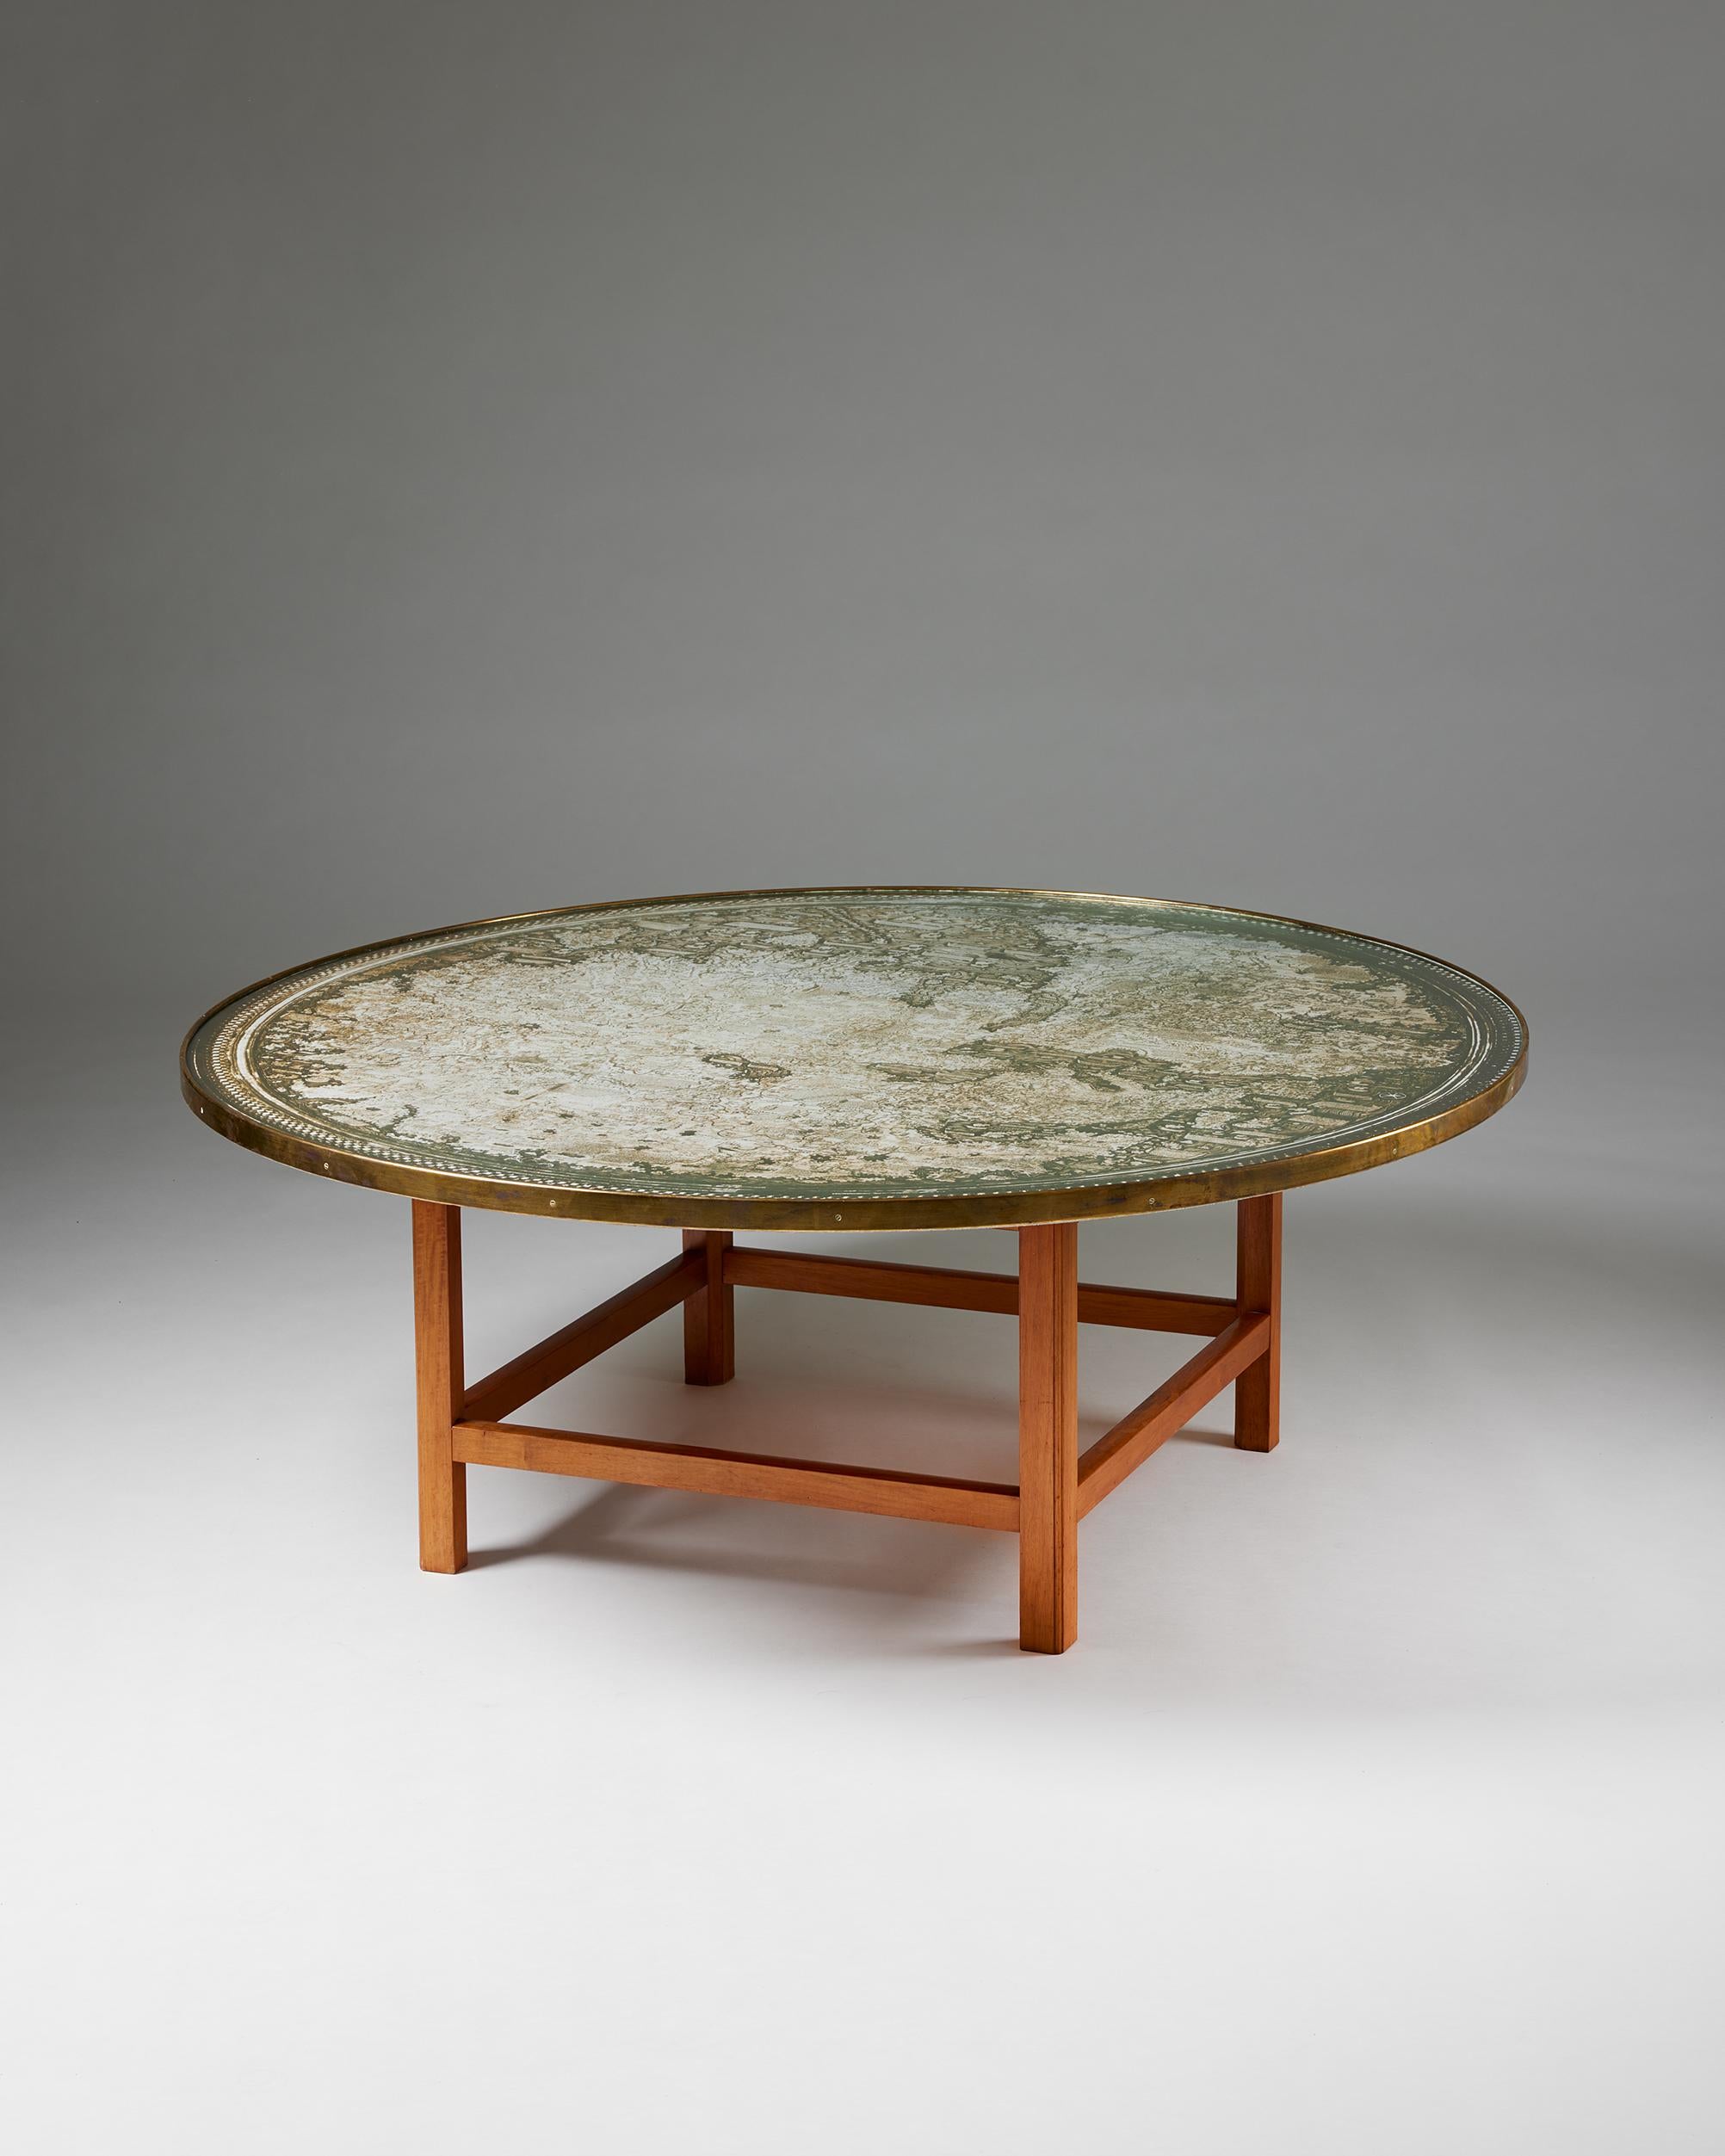 Occasional table model U 601 designed by Josef Frank for Svenskt Tenn,
Sweden, 1960s / 1970s.

Mahogany, glass and brass.

The map is a replica of the world map drawn by the Venetian monk and cartographer, Fra Mauro, ca 1450. The original map can be